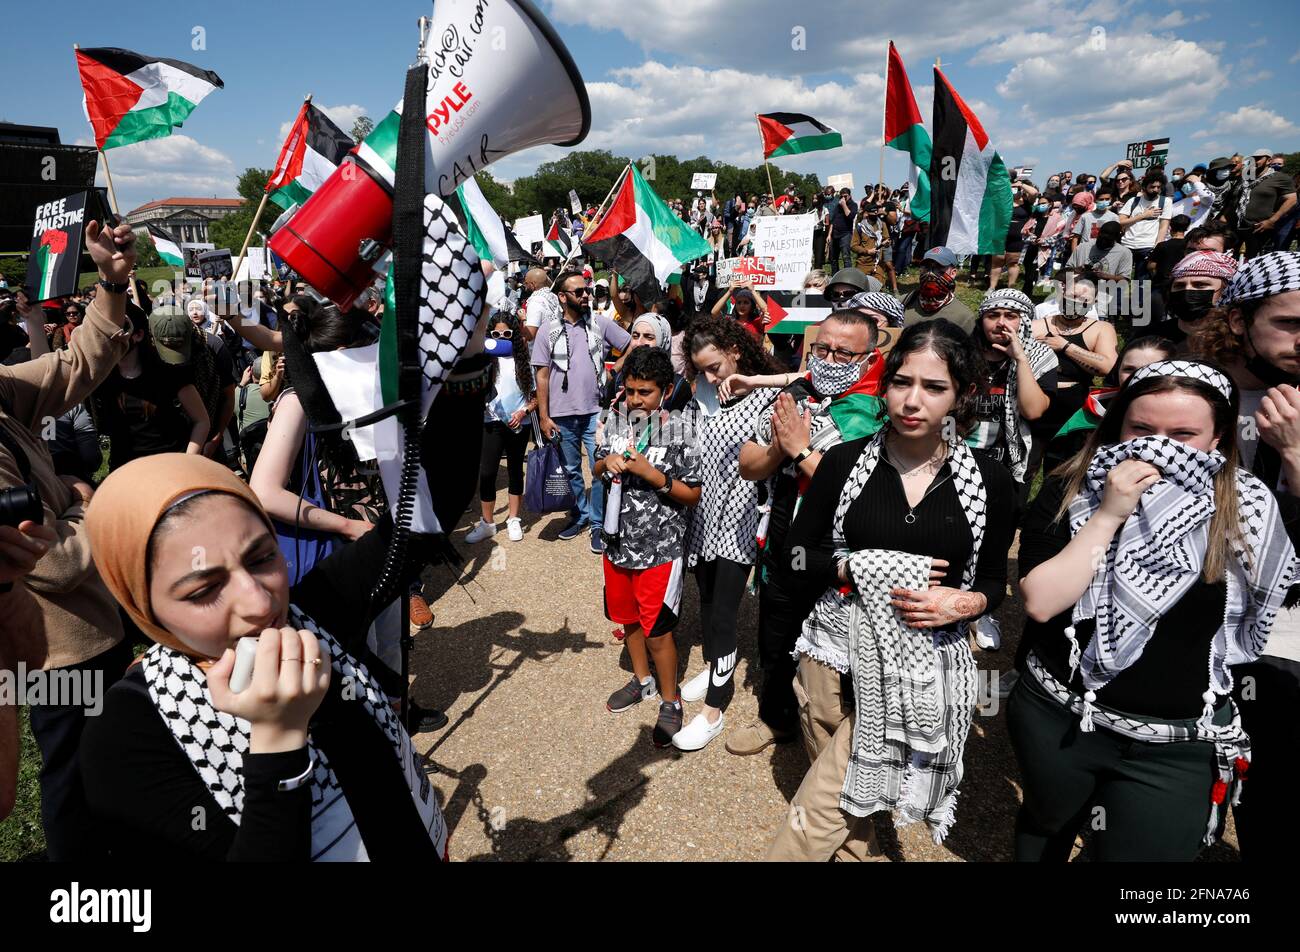 Pro-Palestinian demonstrators protest against the ongoing conflict in Israel and Palestinian territories during a rally at the Washington Monument in Washington, U.S., May 15, 2021. REUTERS/Yuri Gripas Stock Photo